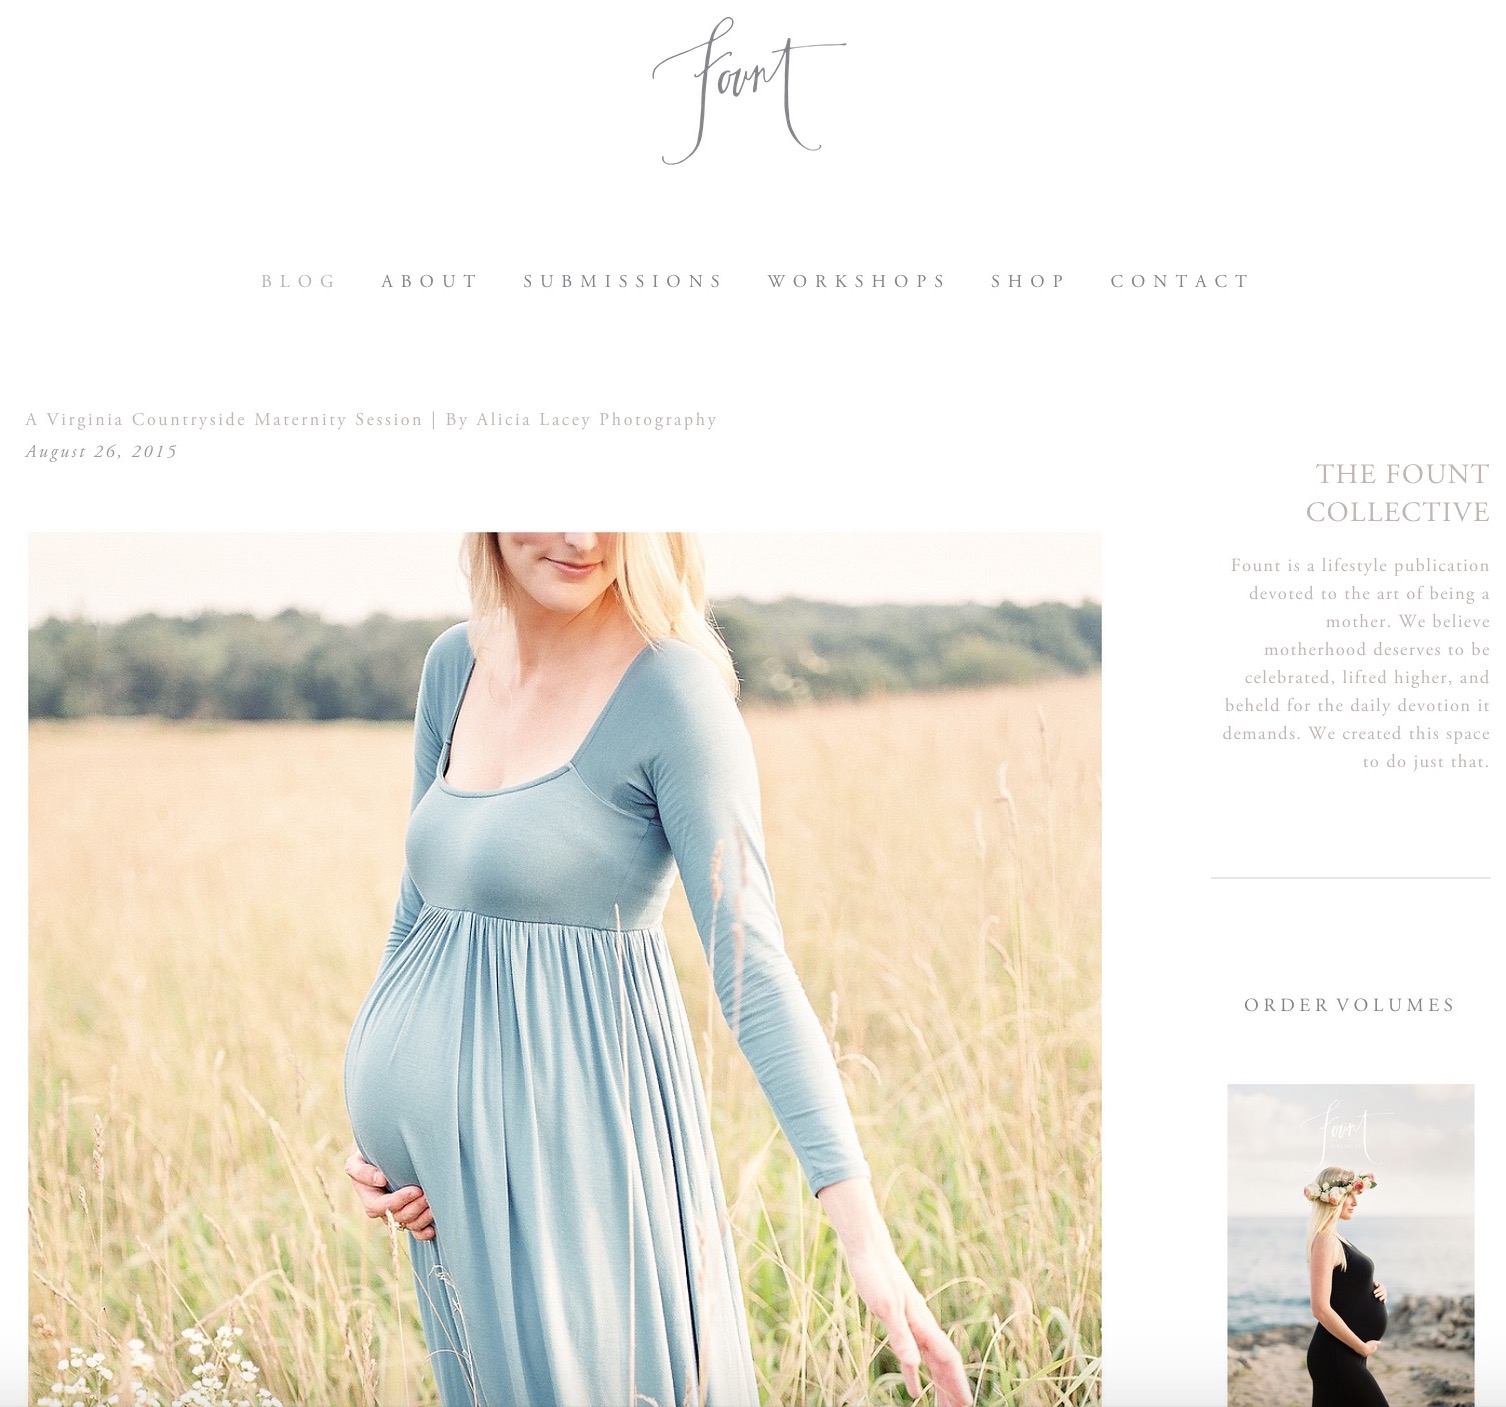 A Fine Art Film Session featured on The Fount Collective maternity and motherhood blog.